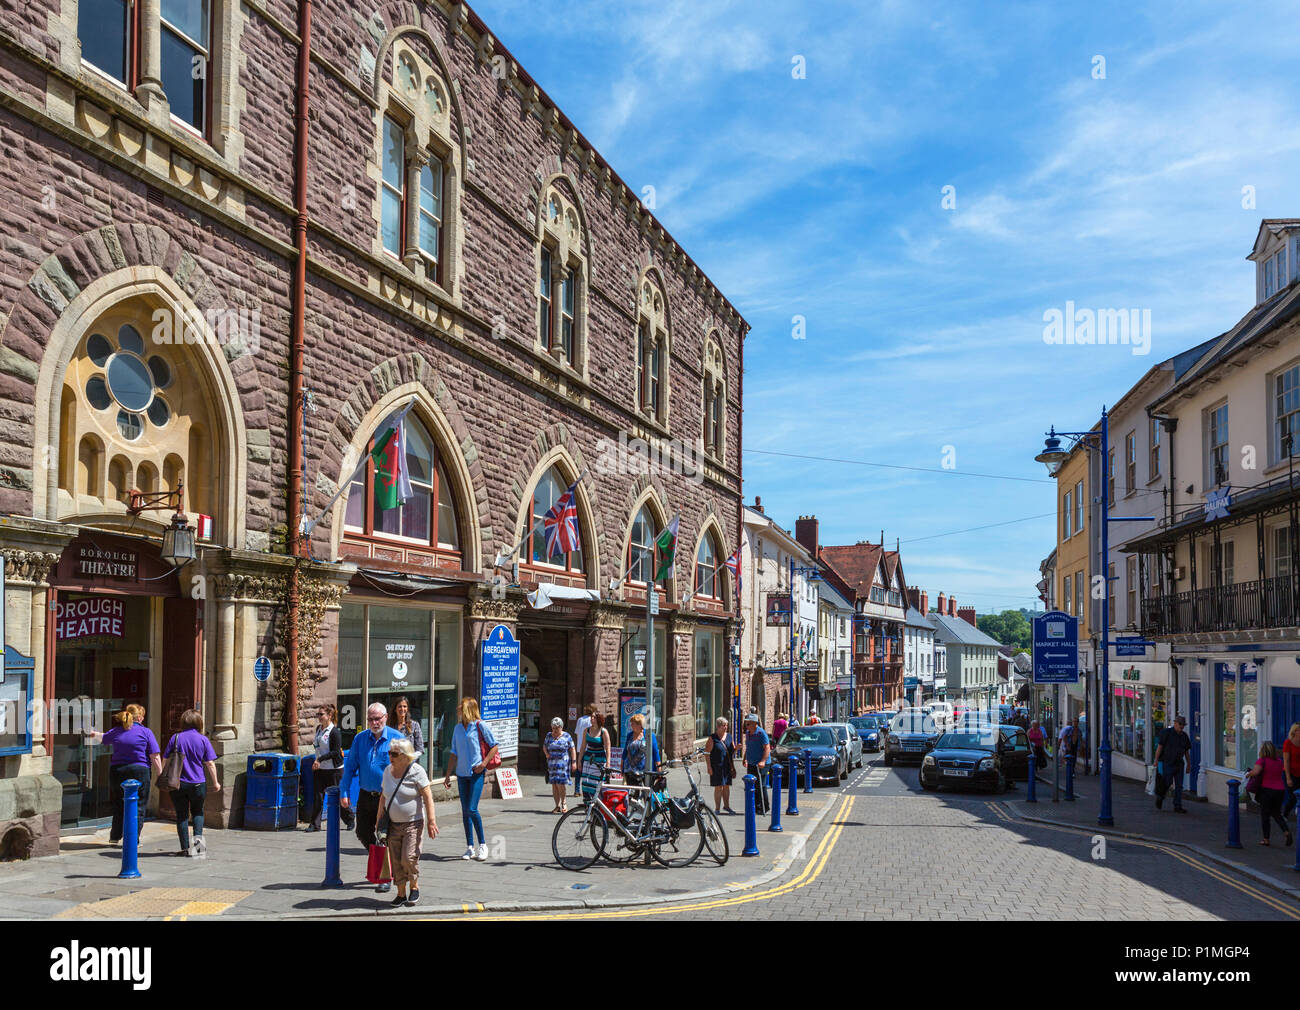 Shops and Borough Theatre on Cross Street in the town centre, Abergavenny, Monmouthshire, Wales, UK Stock Photo